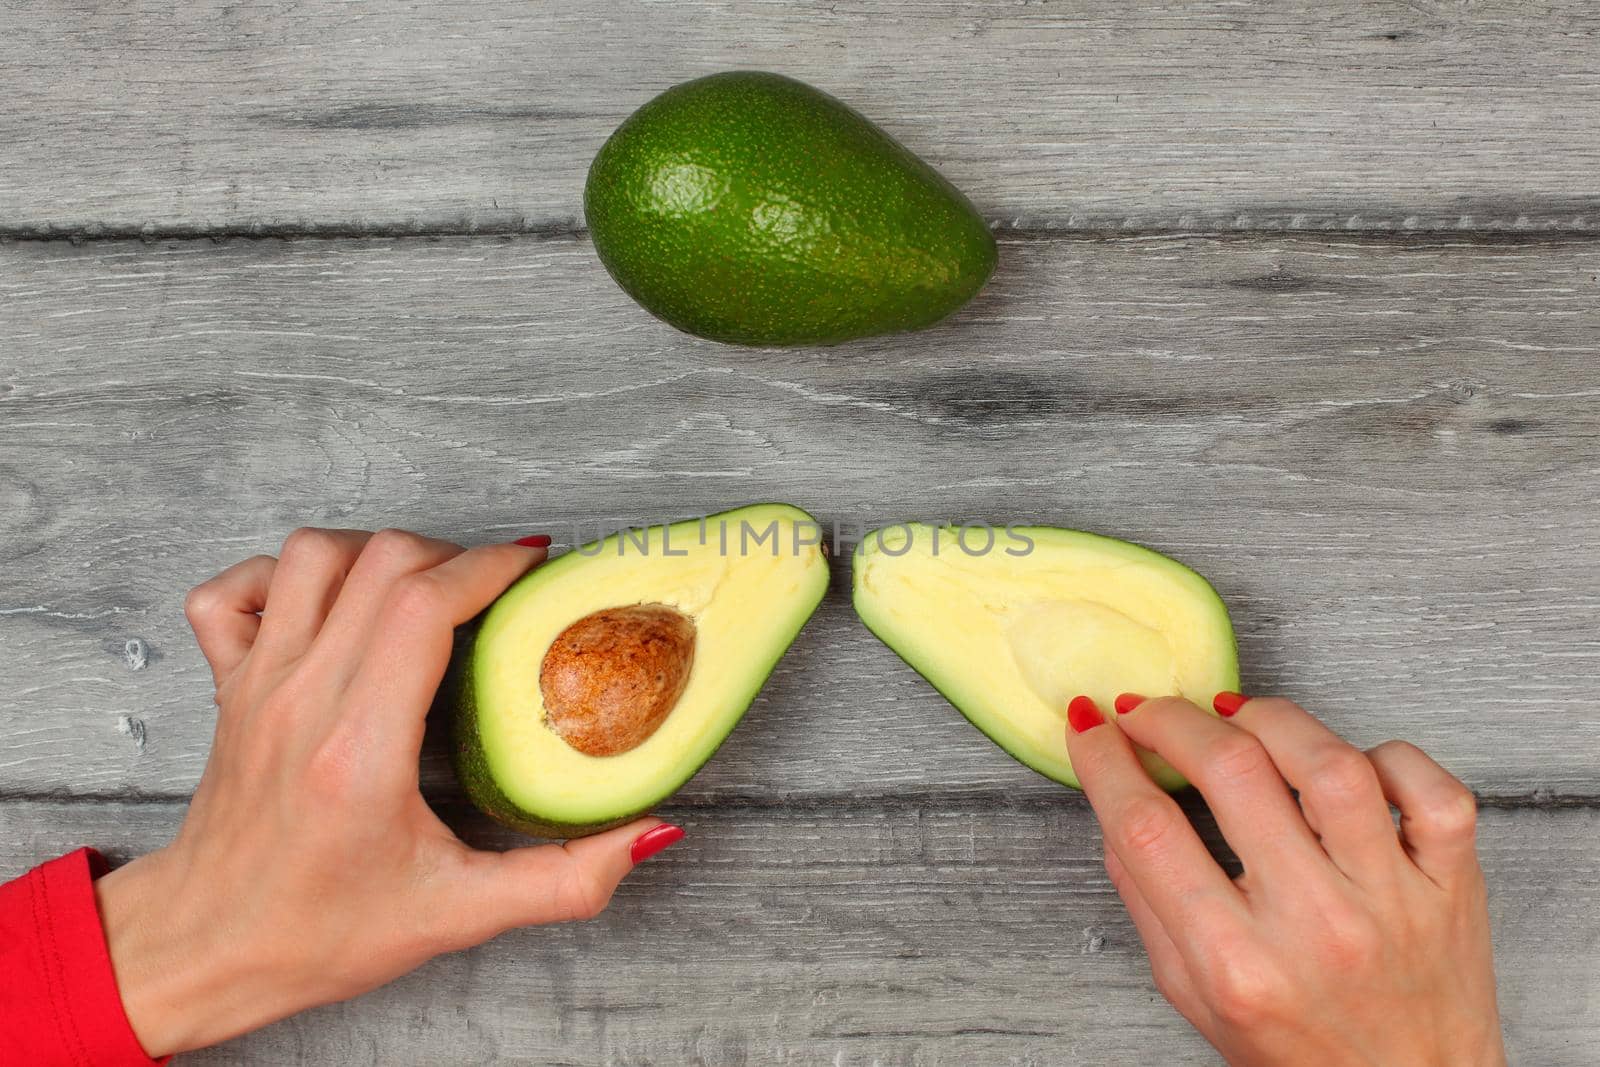 Table top view - woman hands holding avocado cut in half, another one above, placed on gray wood desk